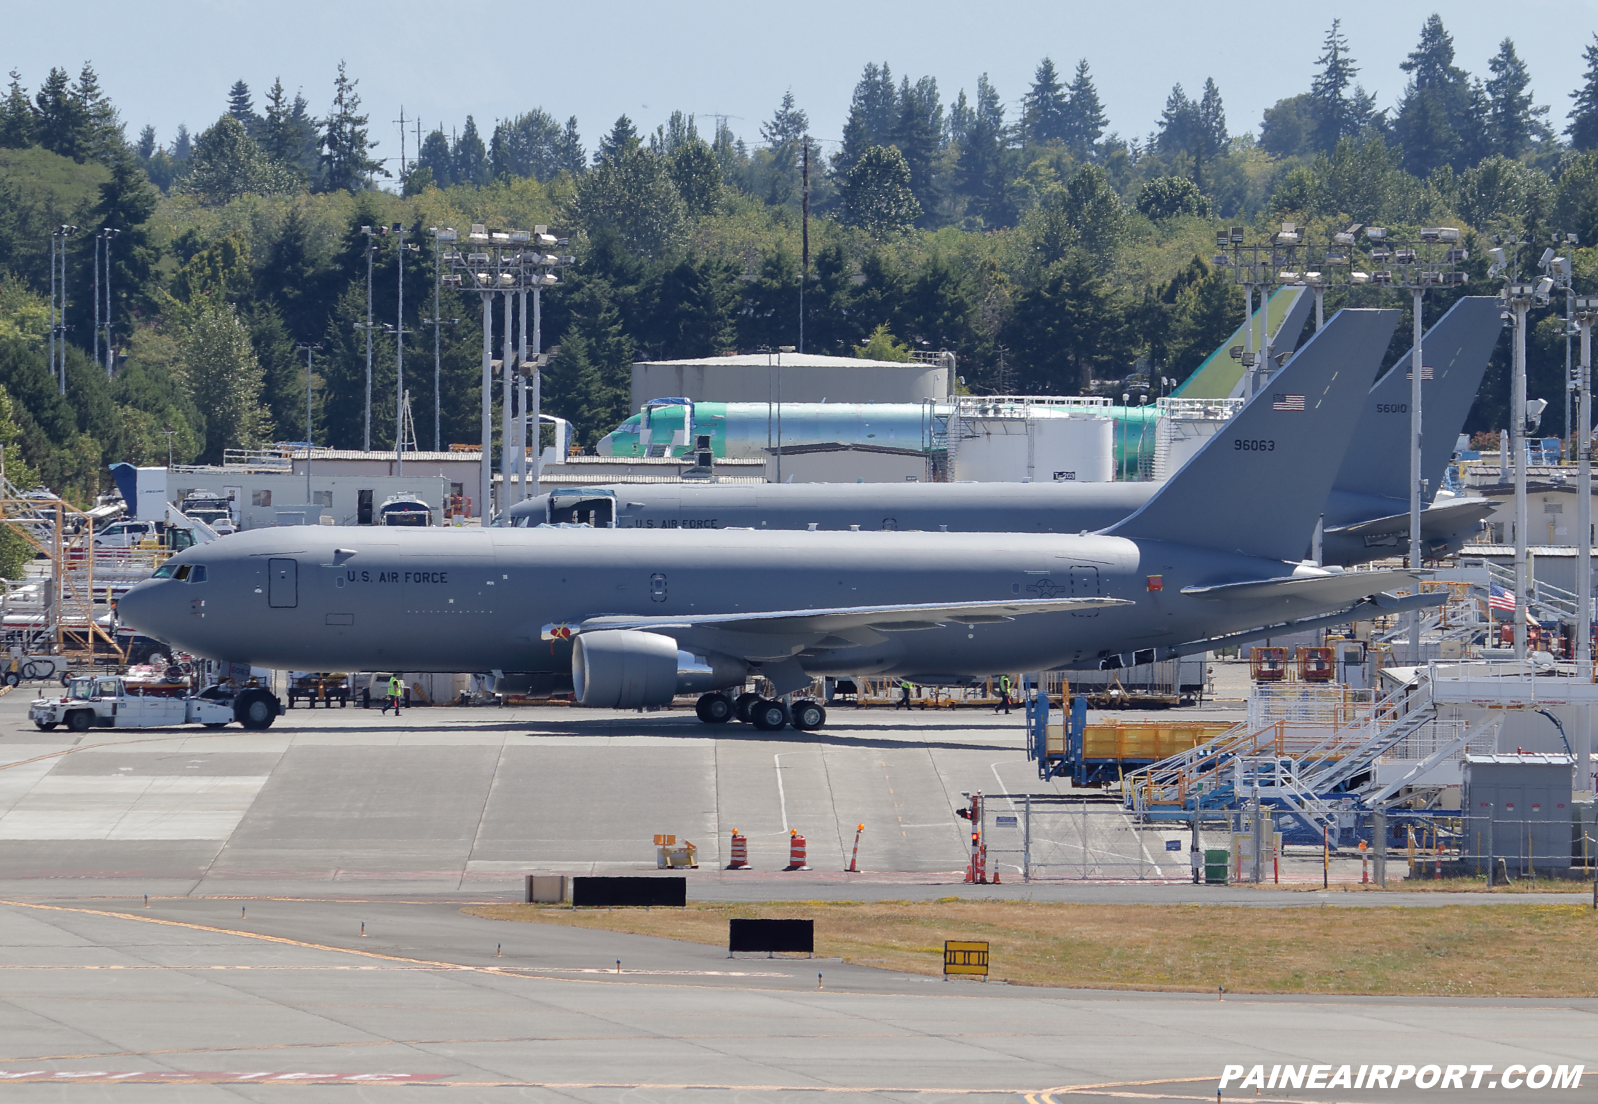 KC-46A 19-46063 at KPAE Paine Field